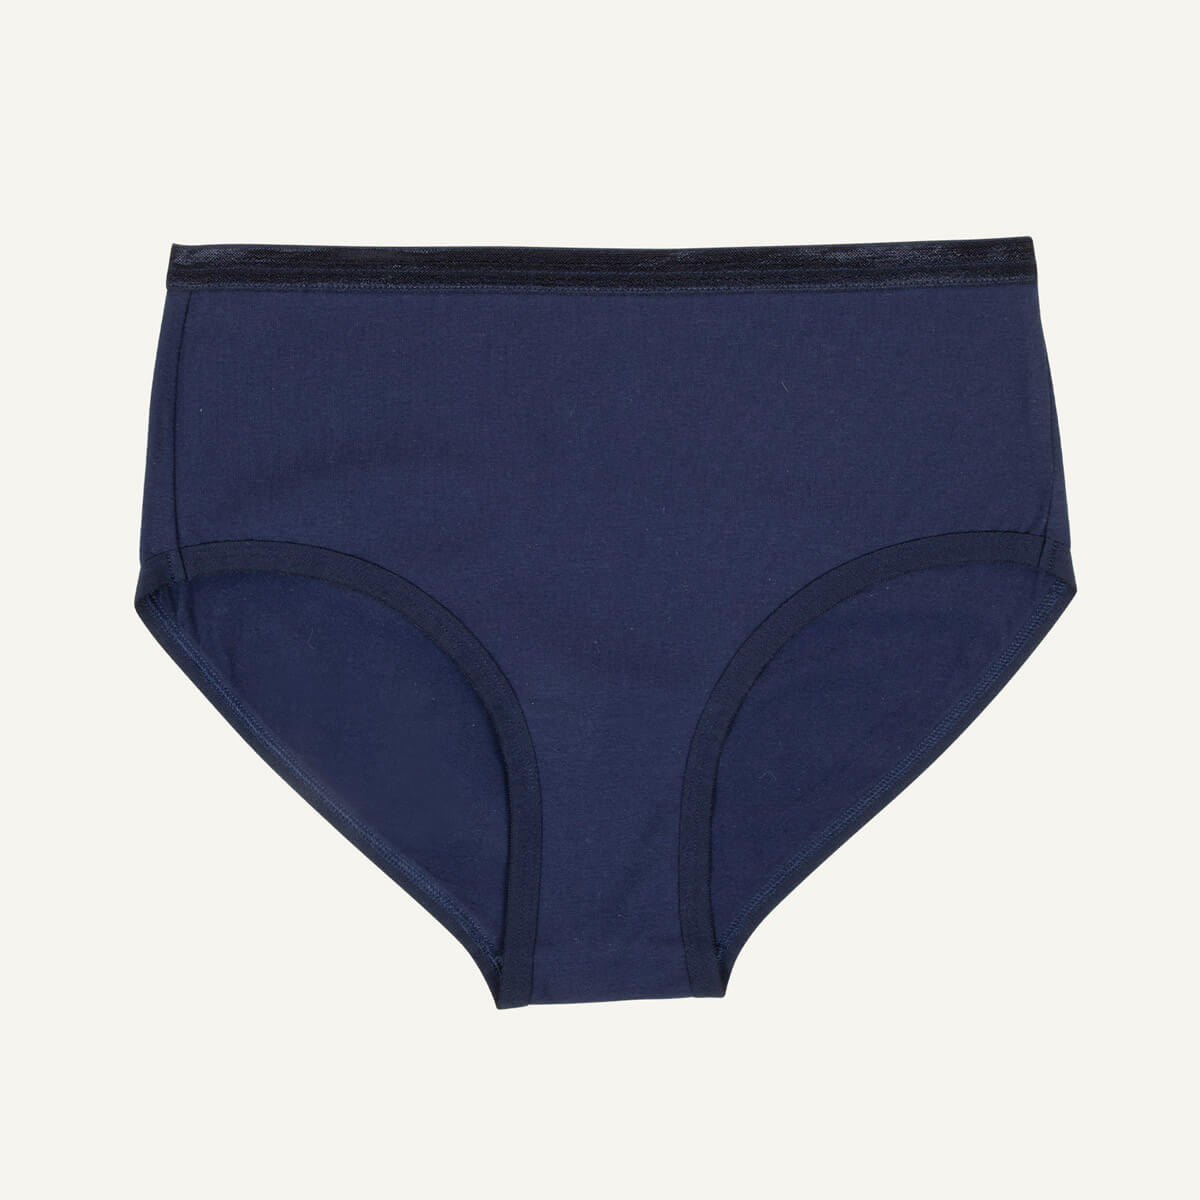 Subset Organic Cotton Women's Mid-Rise Brief: In sizes 2XS-4XL